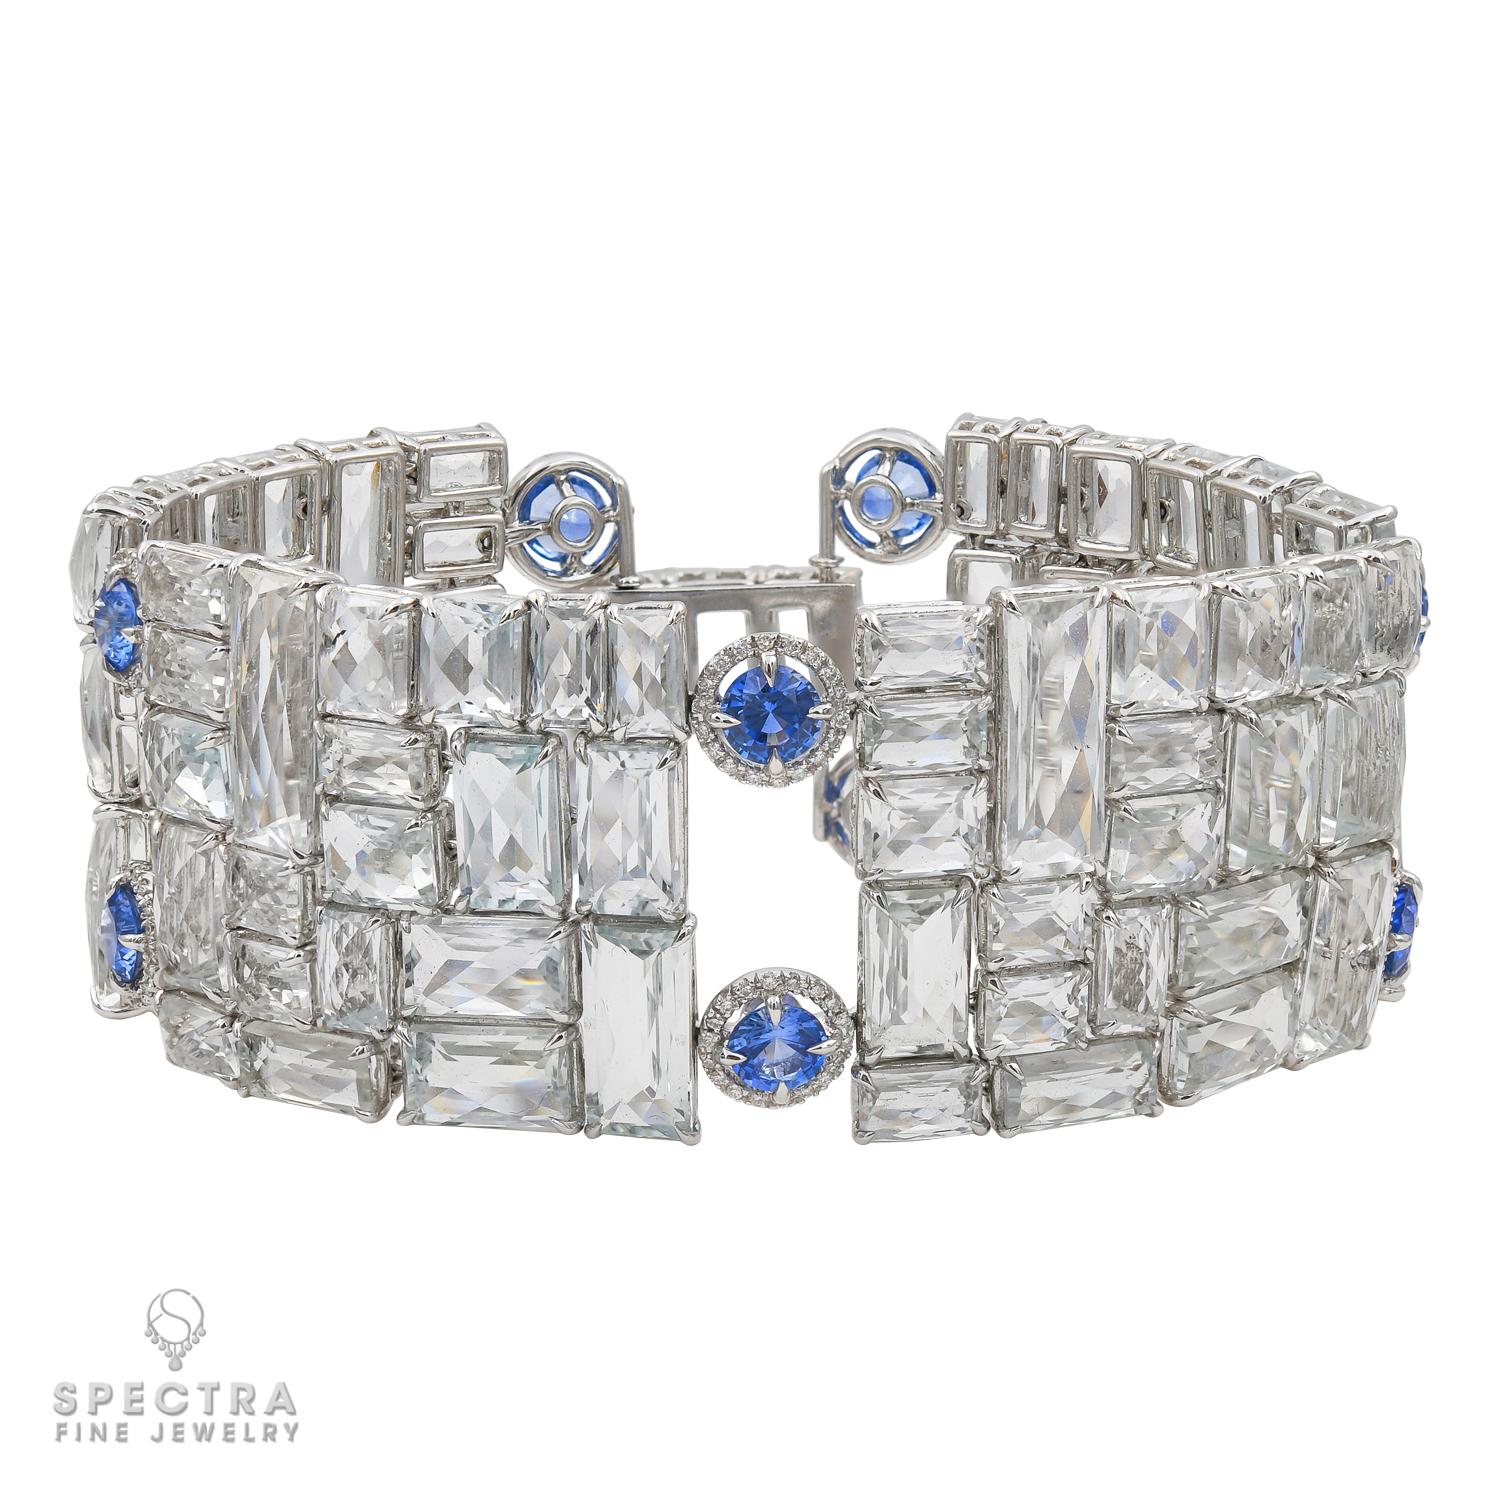 Crafted in 18K white gold, this Contemporary Diamond, Sapphire, and Topaz Articulated Bracelet channels the elegance of the Art Deco era. Comprising four articulated links set with rectangular faceted white topaz and encircled by circular-cut